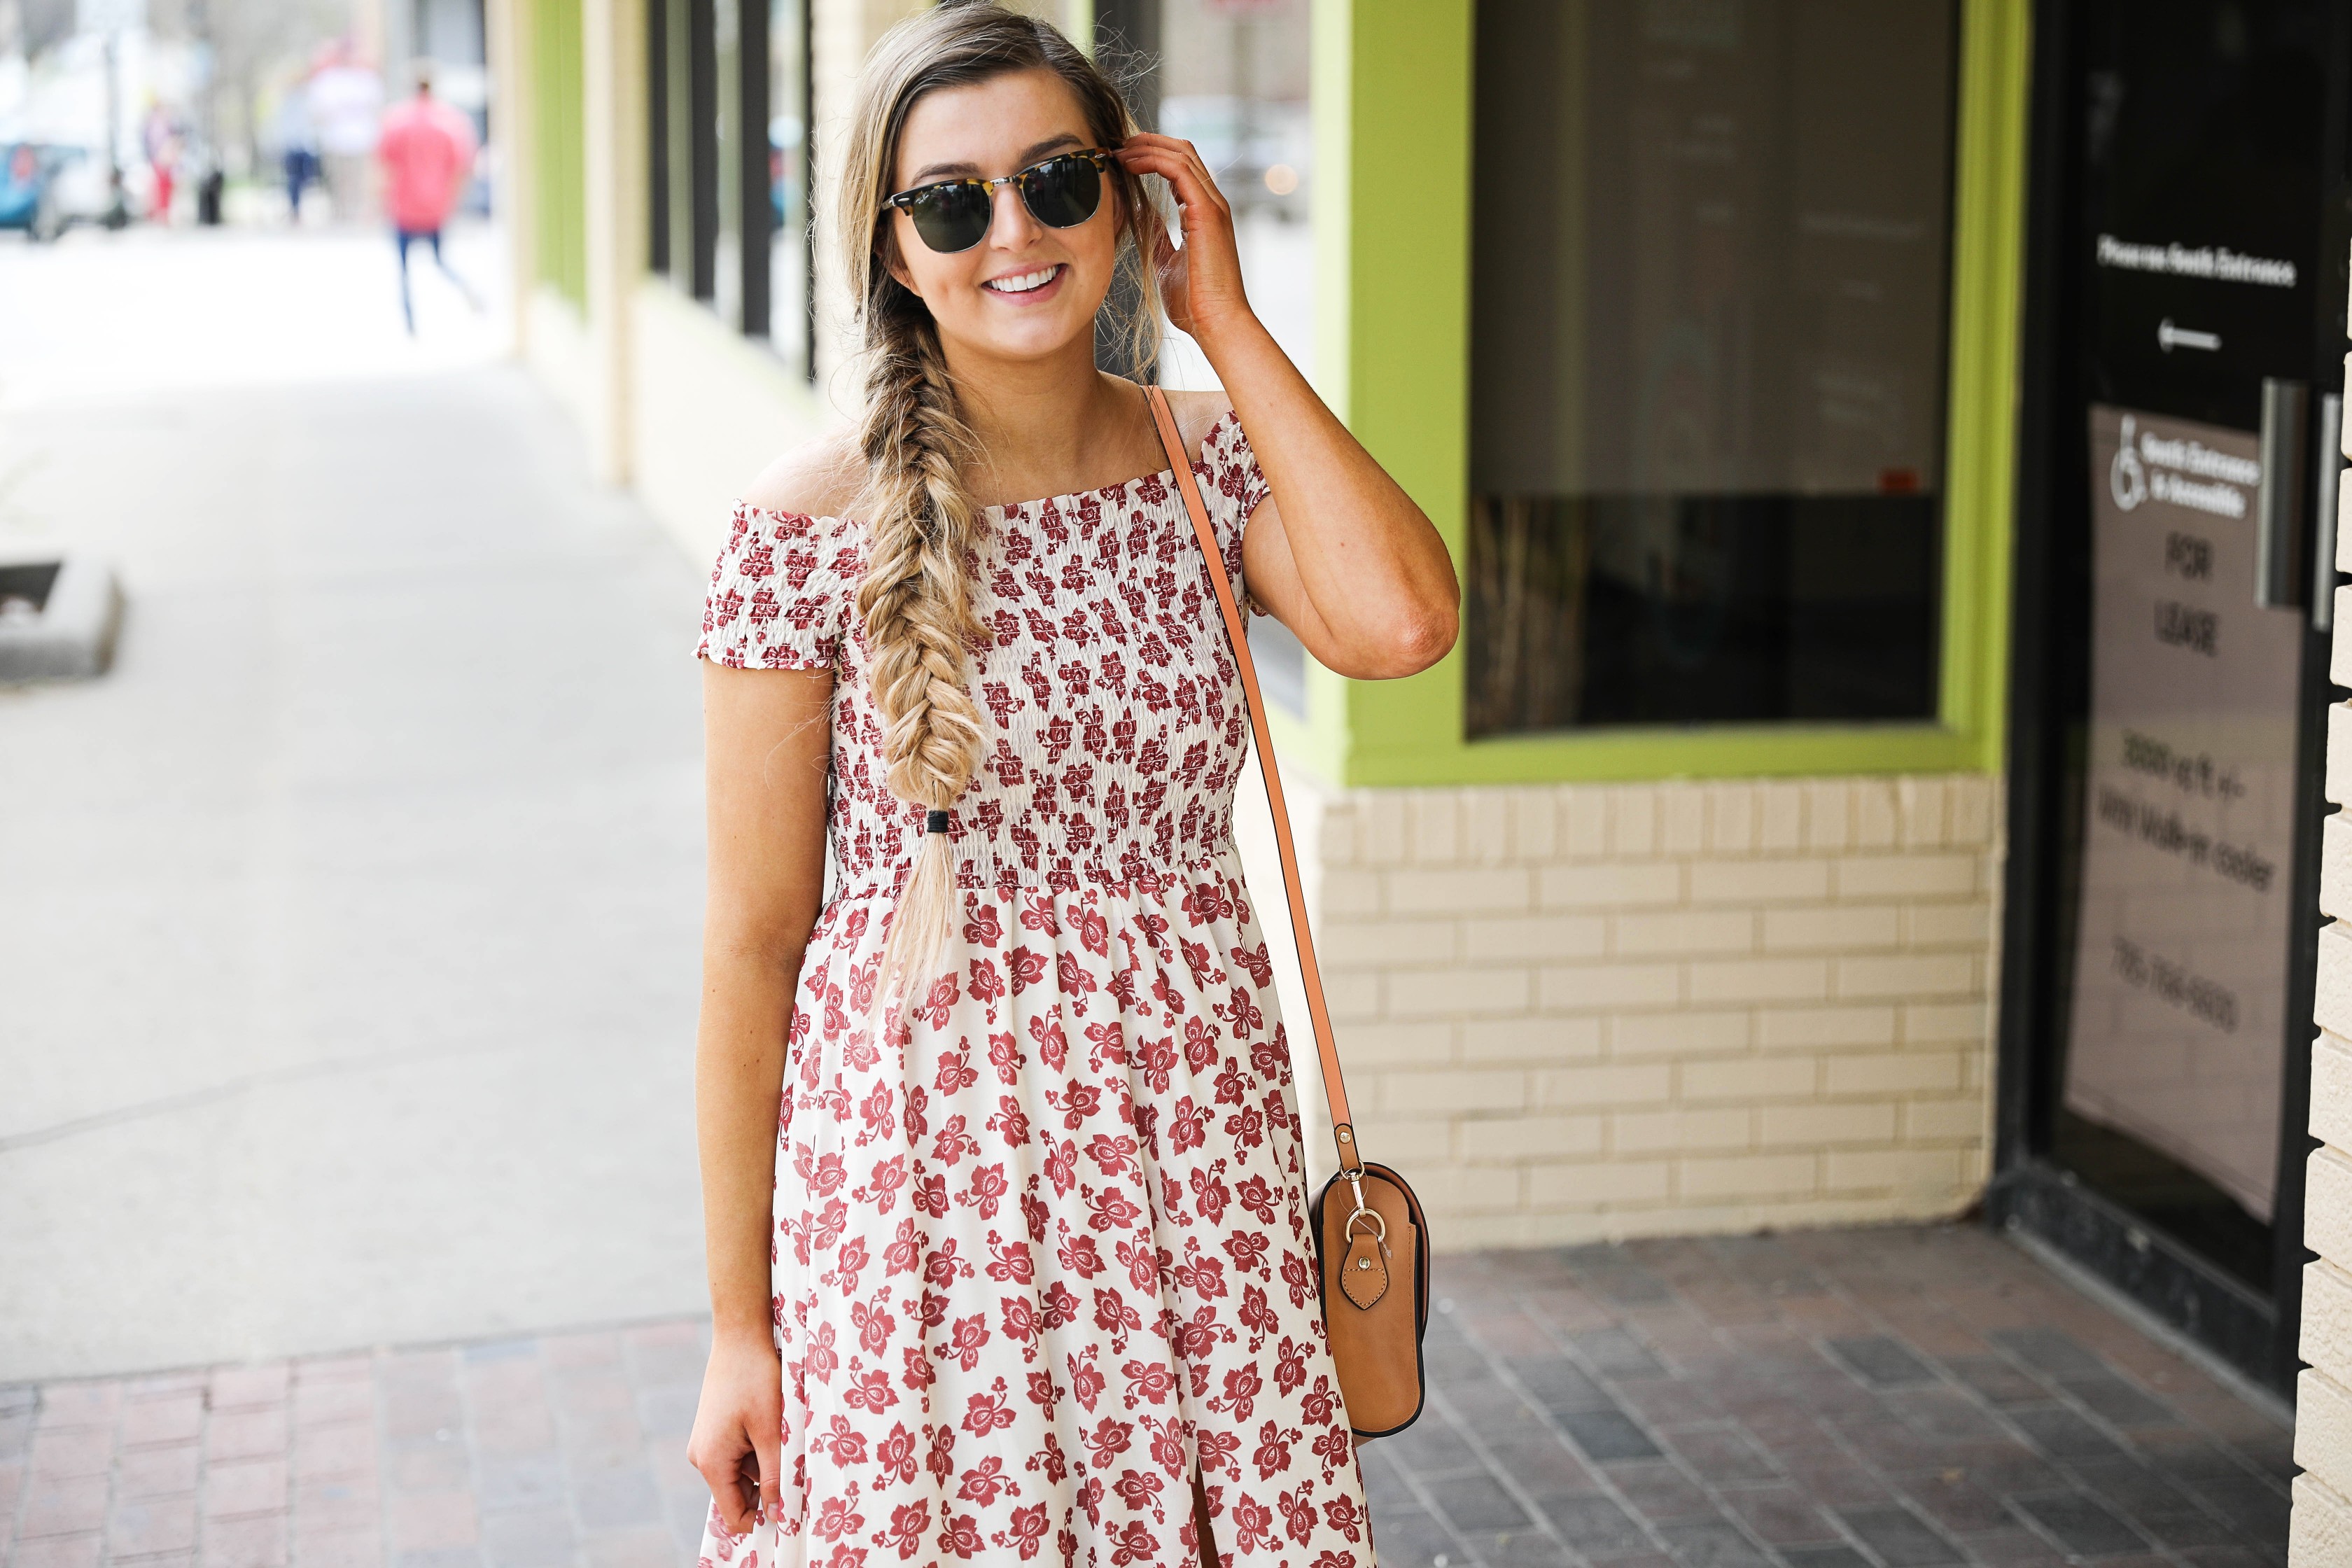 The prettiest floral off the shoulder dress for spring and summer! I am a sucker for a cute floral dress. I love the slit on the front of this dress and I paired it with a brown leather bag and sunglasses! By Lauren Lindmark on daily dose of charm dailydoseofcharm.com